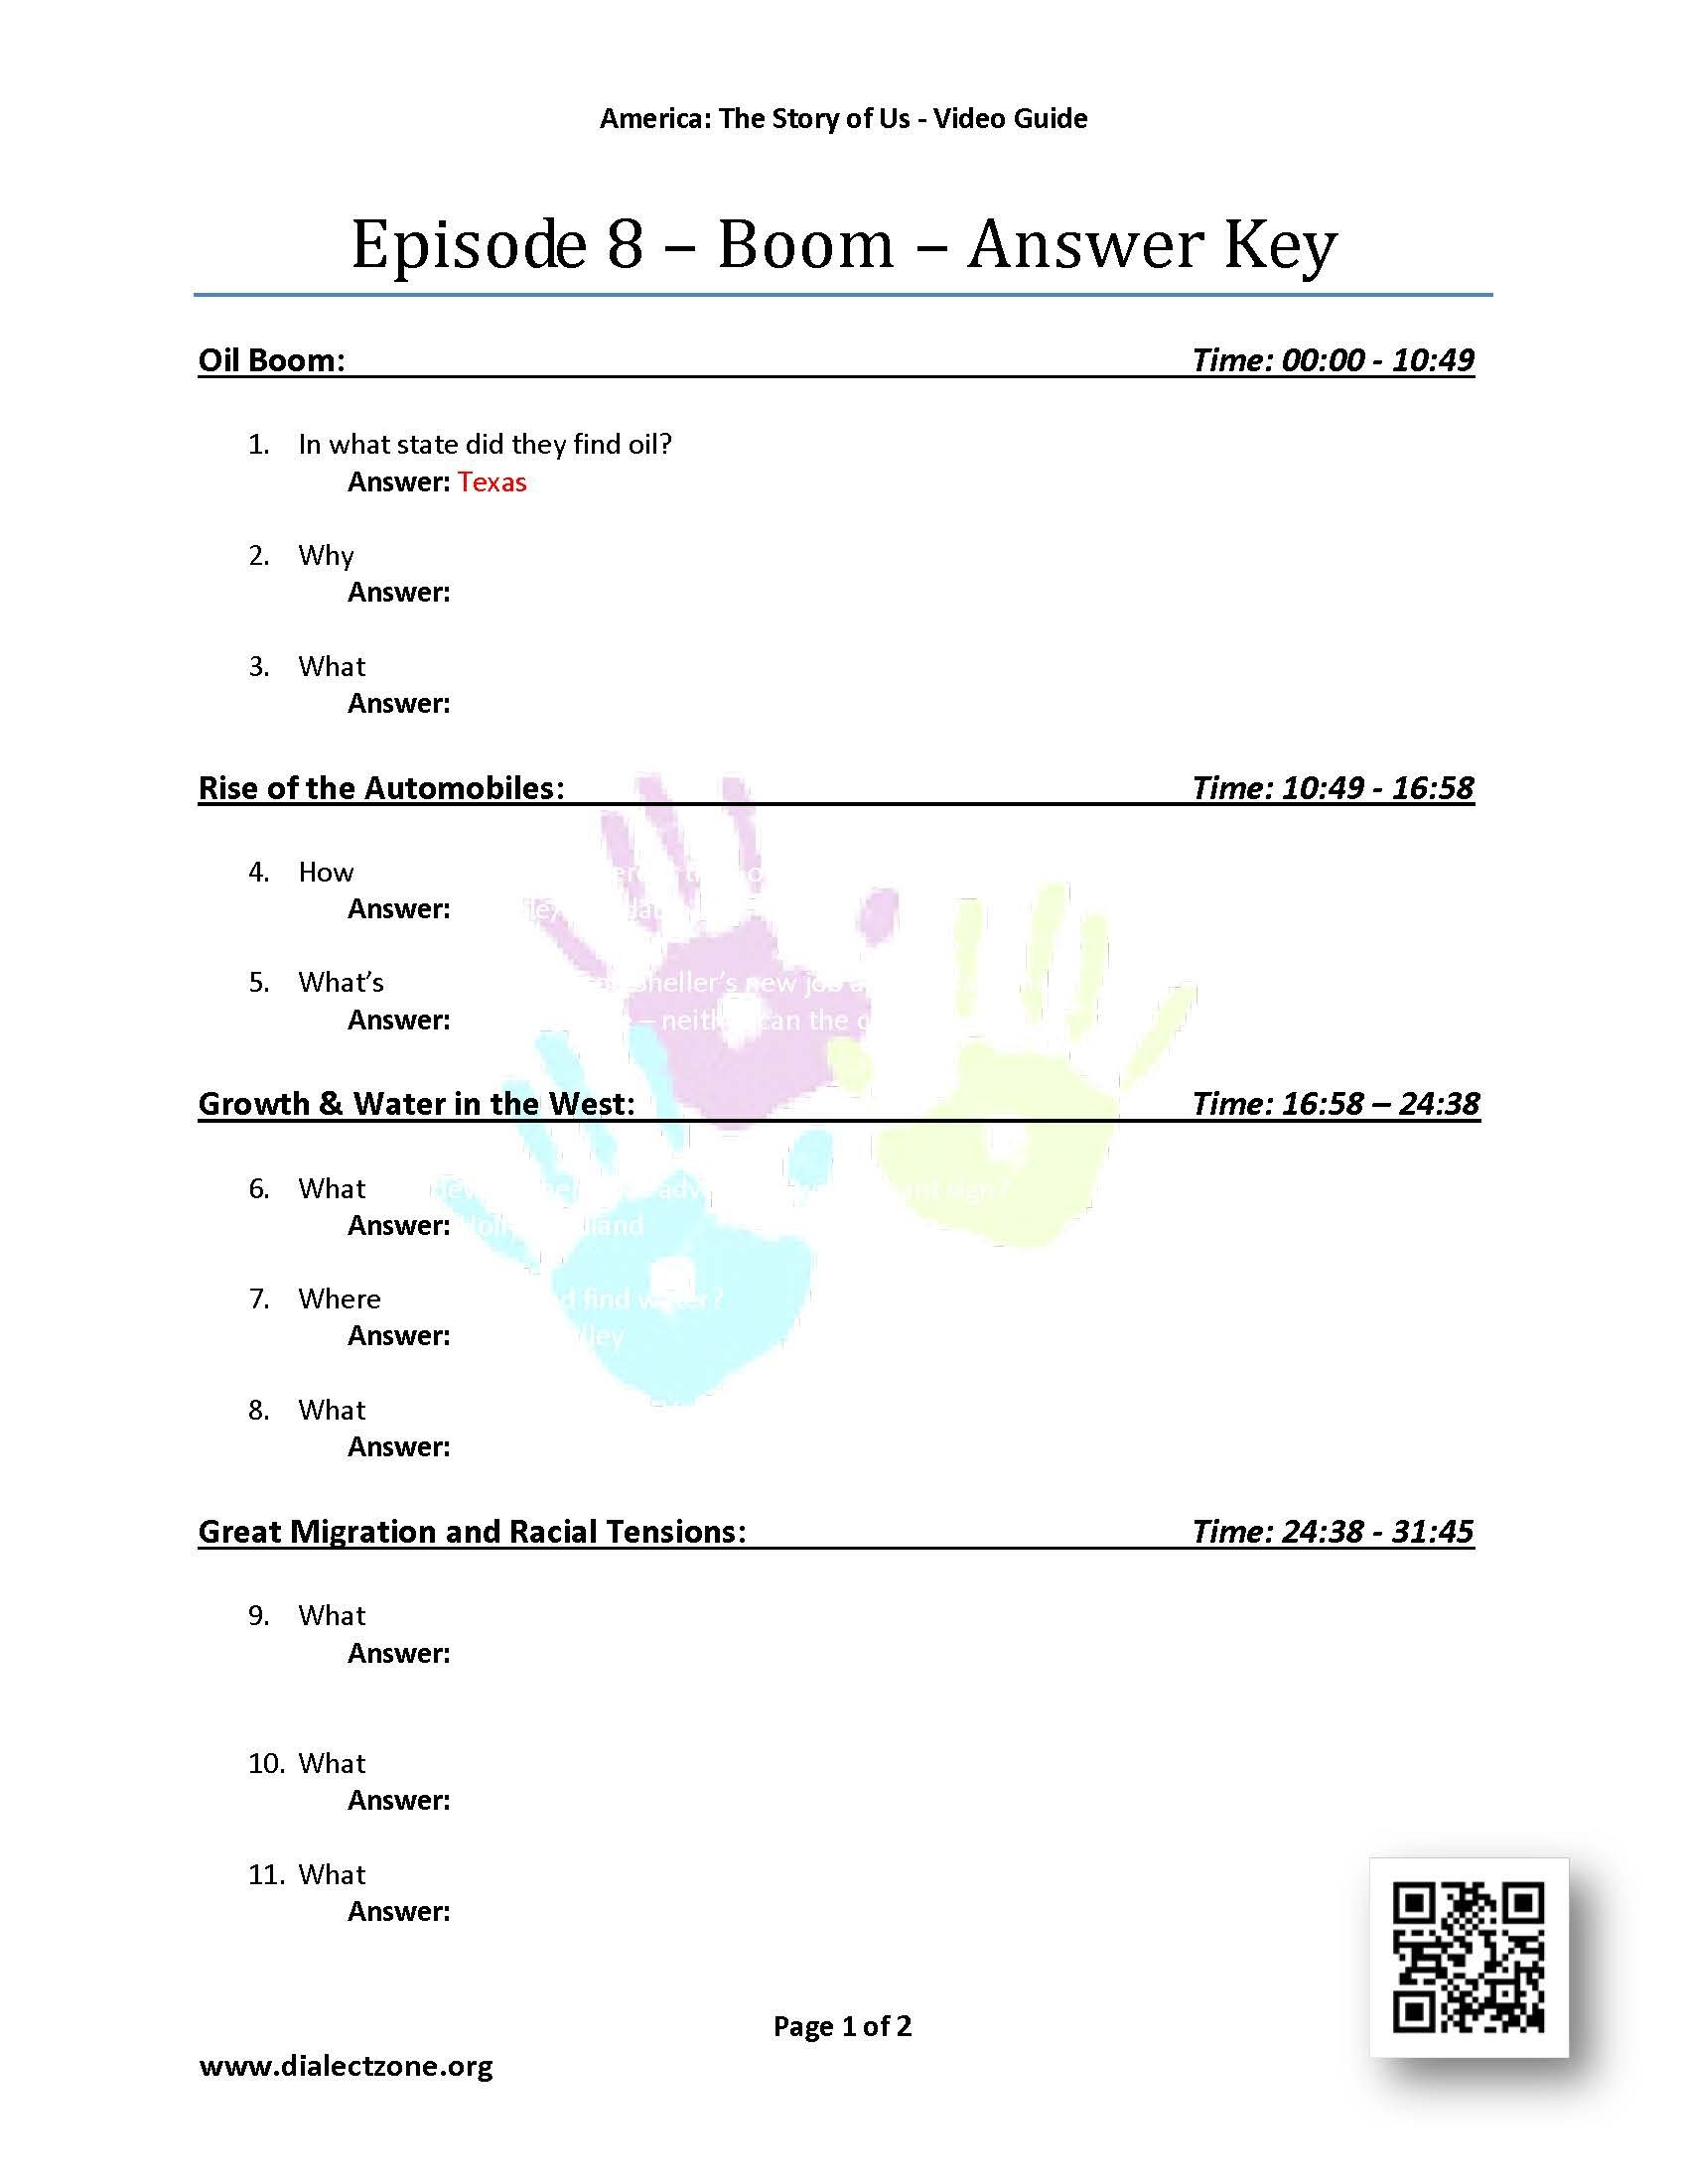 Episode 8  Boom  Answer Keys Atsouep8Key  199  Dialect Zone With America The Story Of Us Episode 8 Worksheet Answer Key